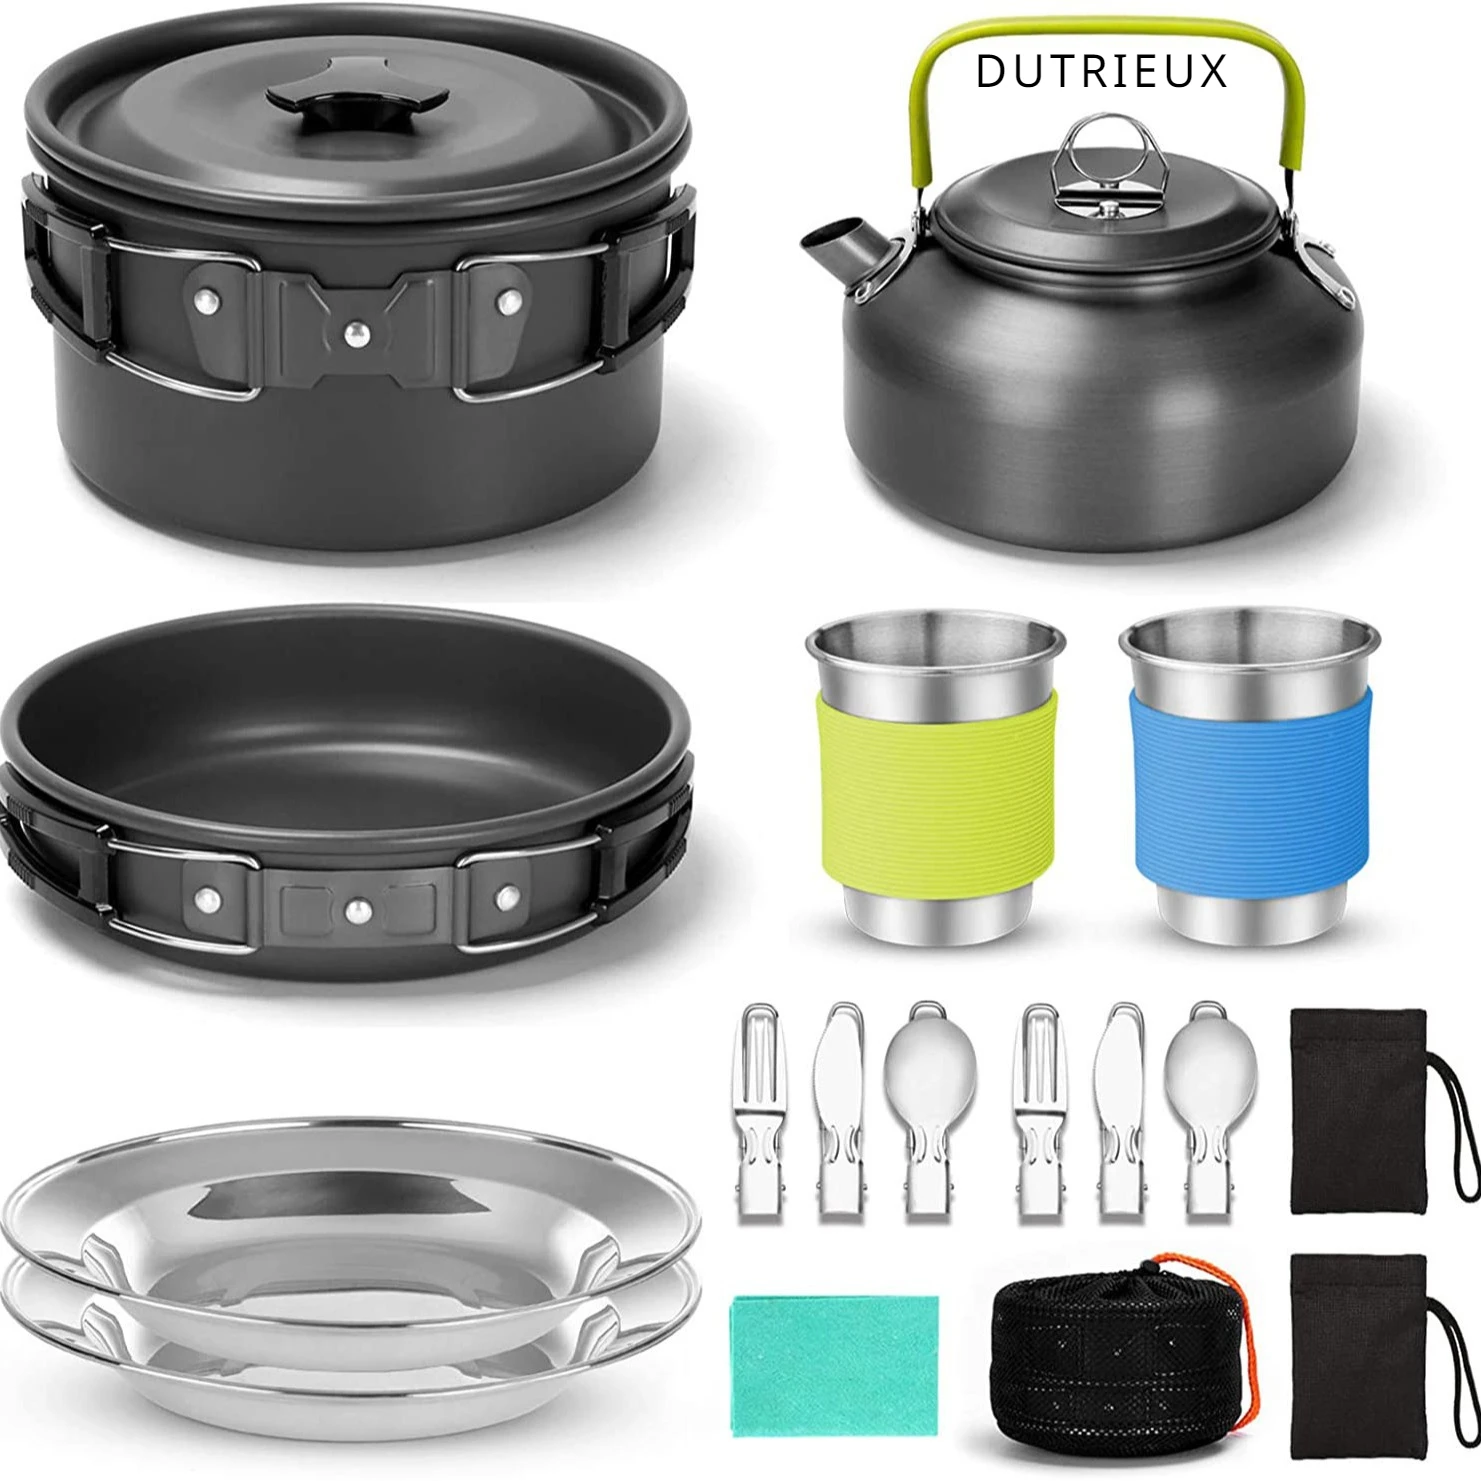 

New Camping Cookware Set Aluminum Nonstick Portable Outdoor Tableware Kettle Pot Cookset Cooking Pan Bowl for Hiking BBQ Picnic